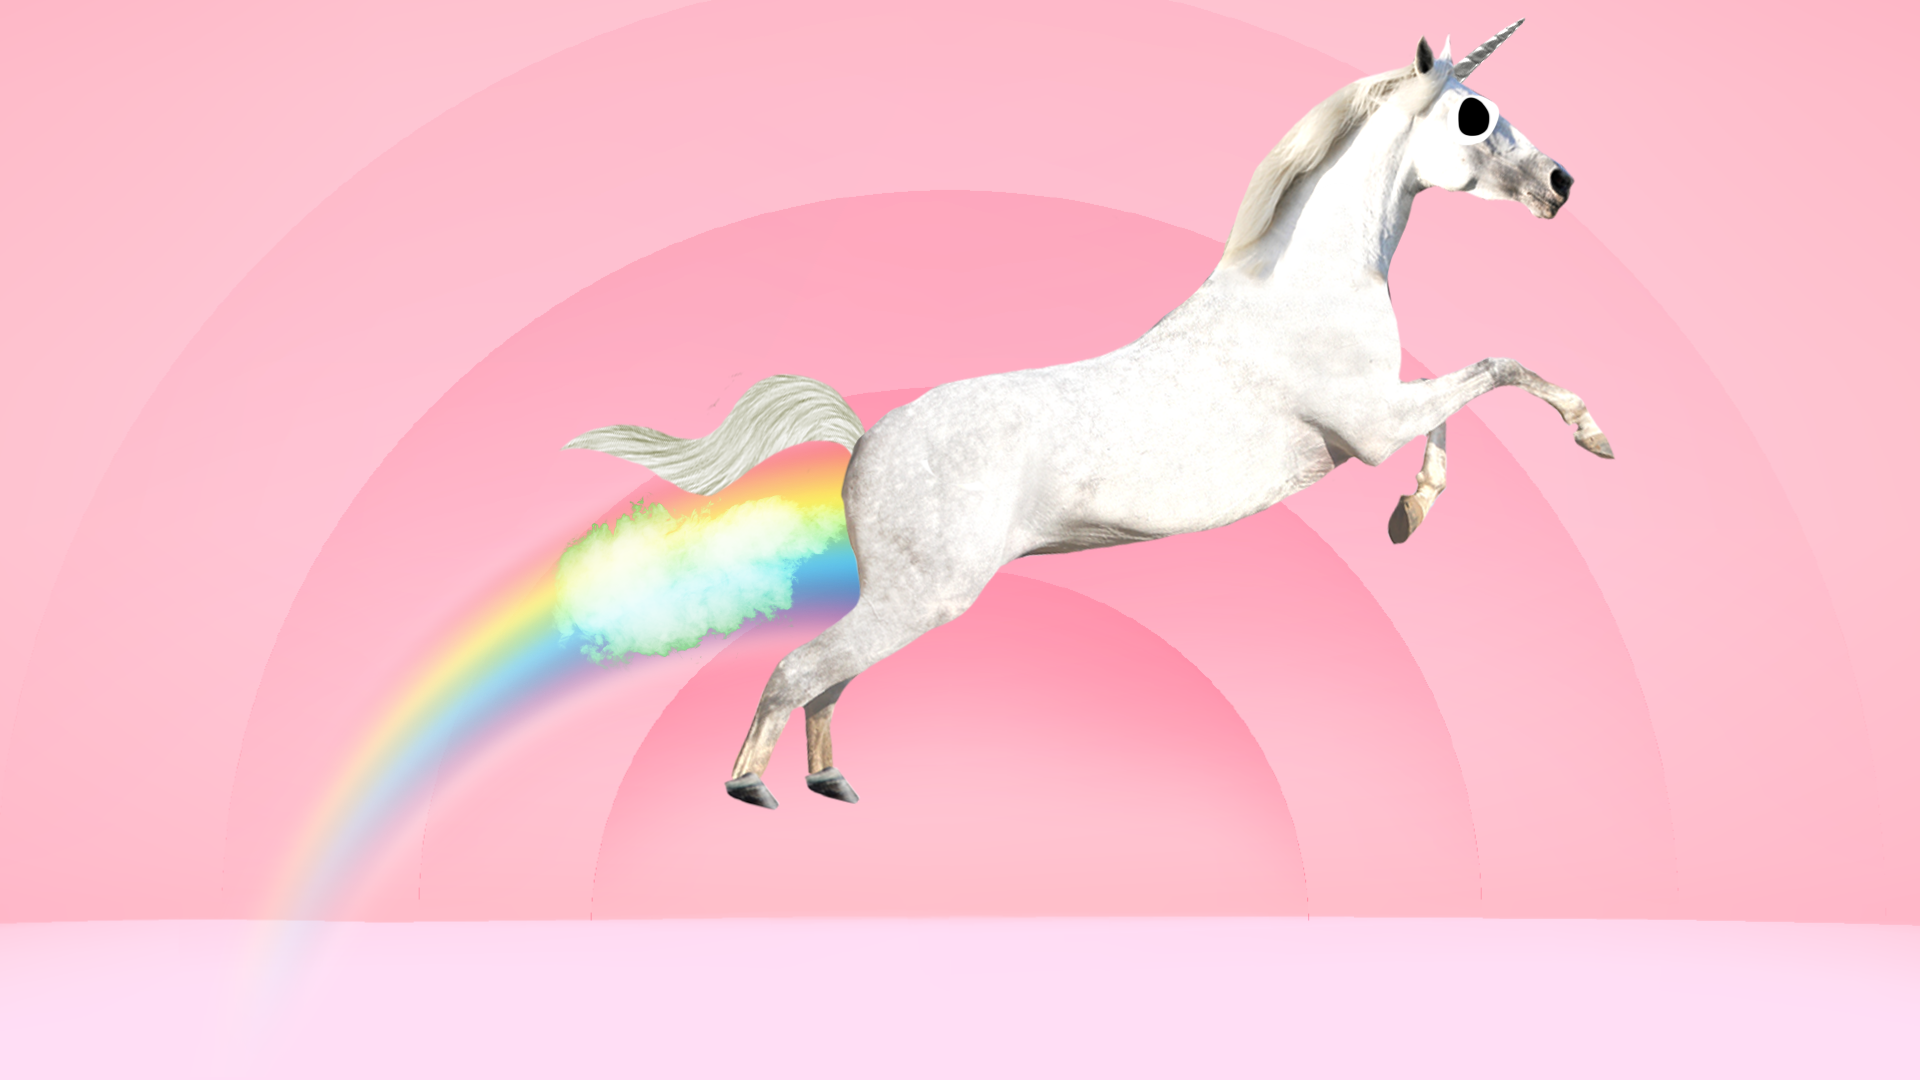 Farting unicorn on pink background